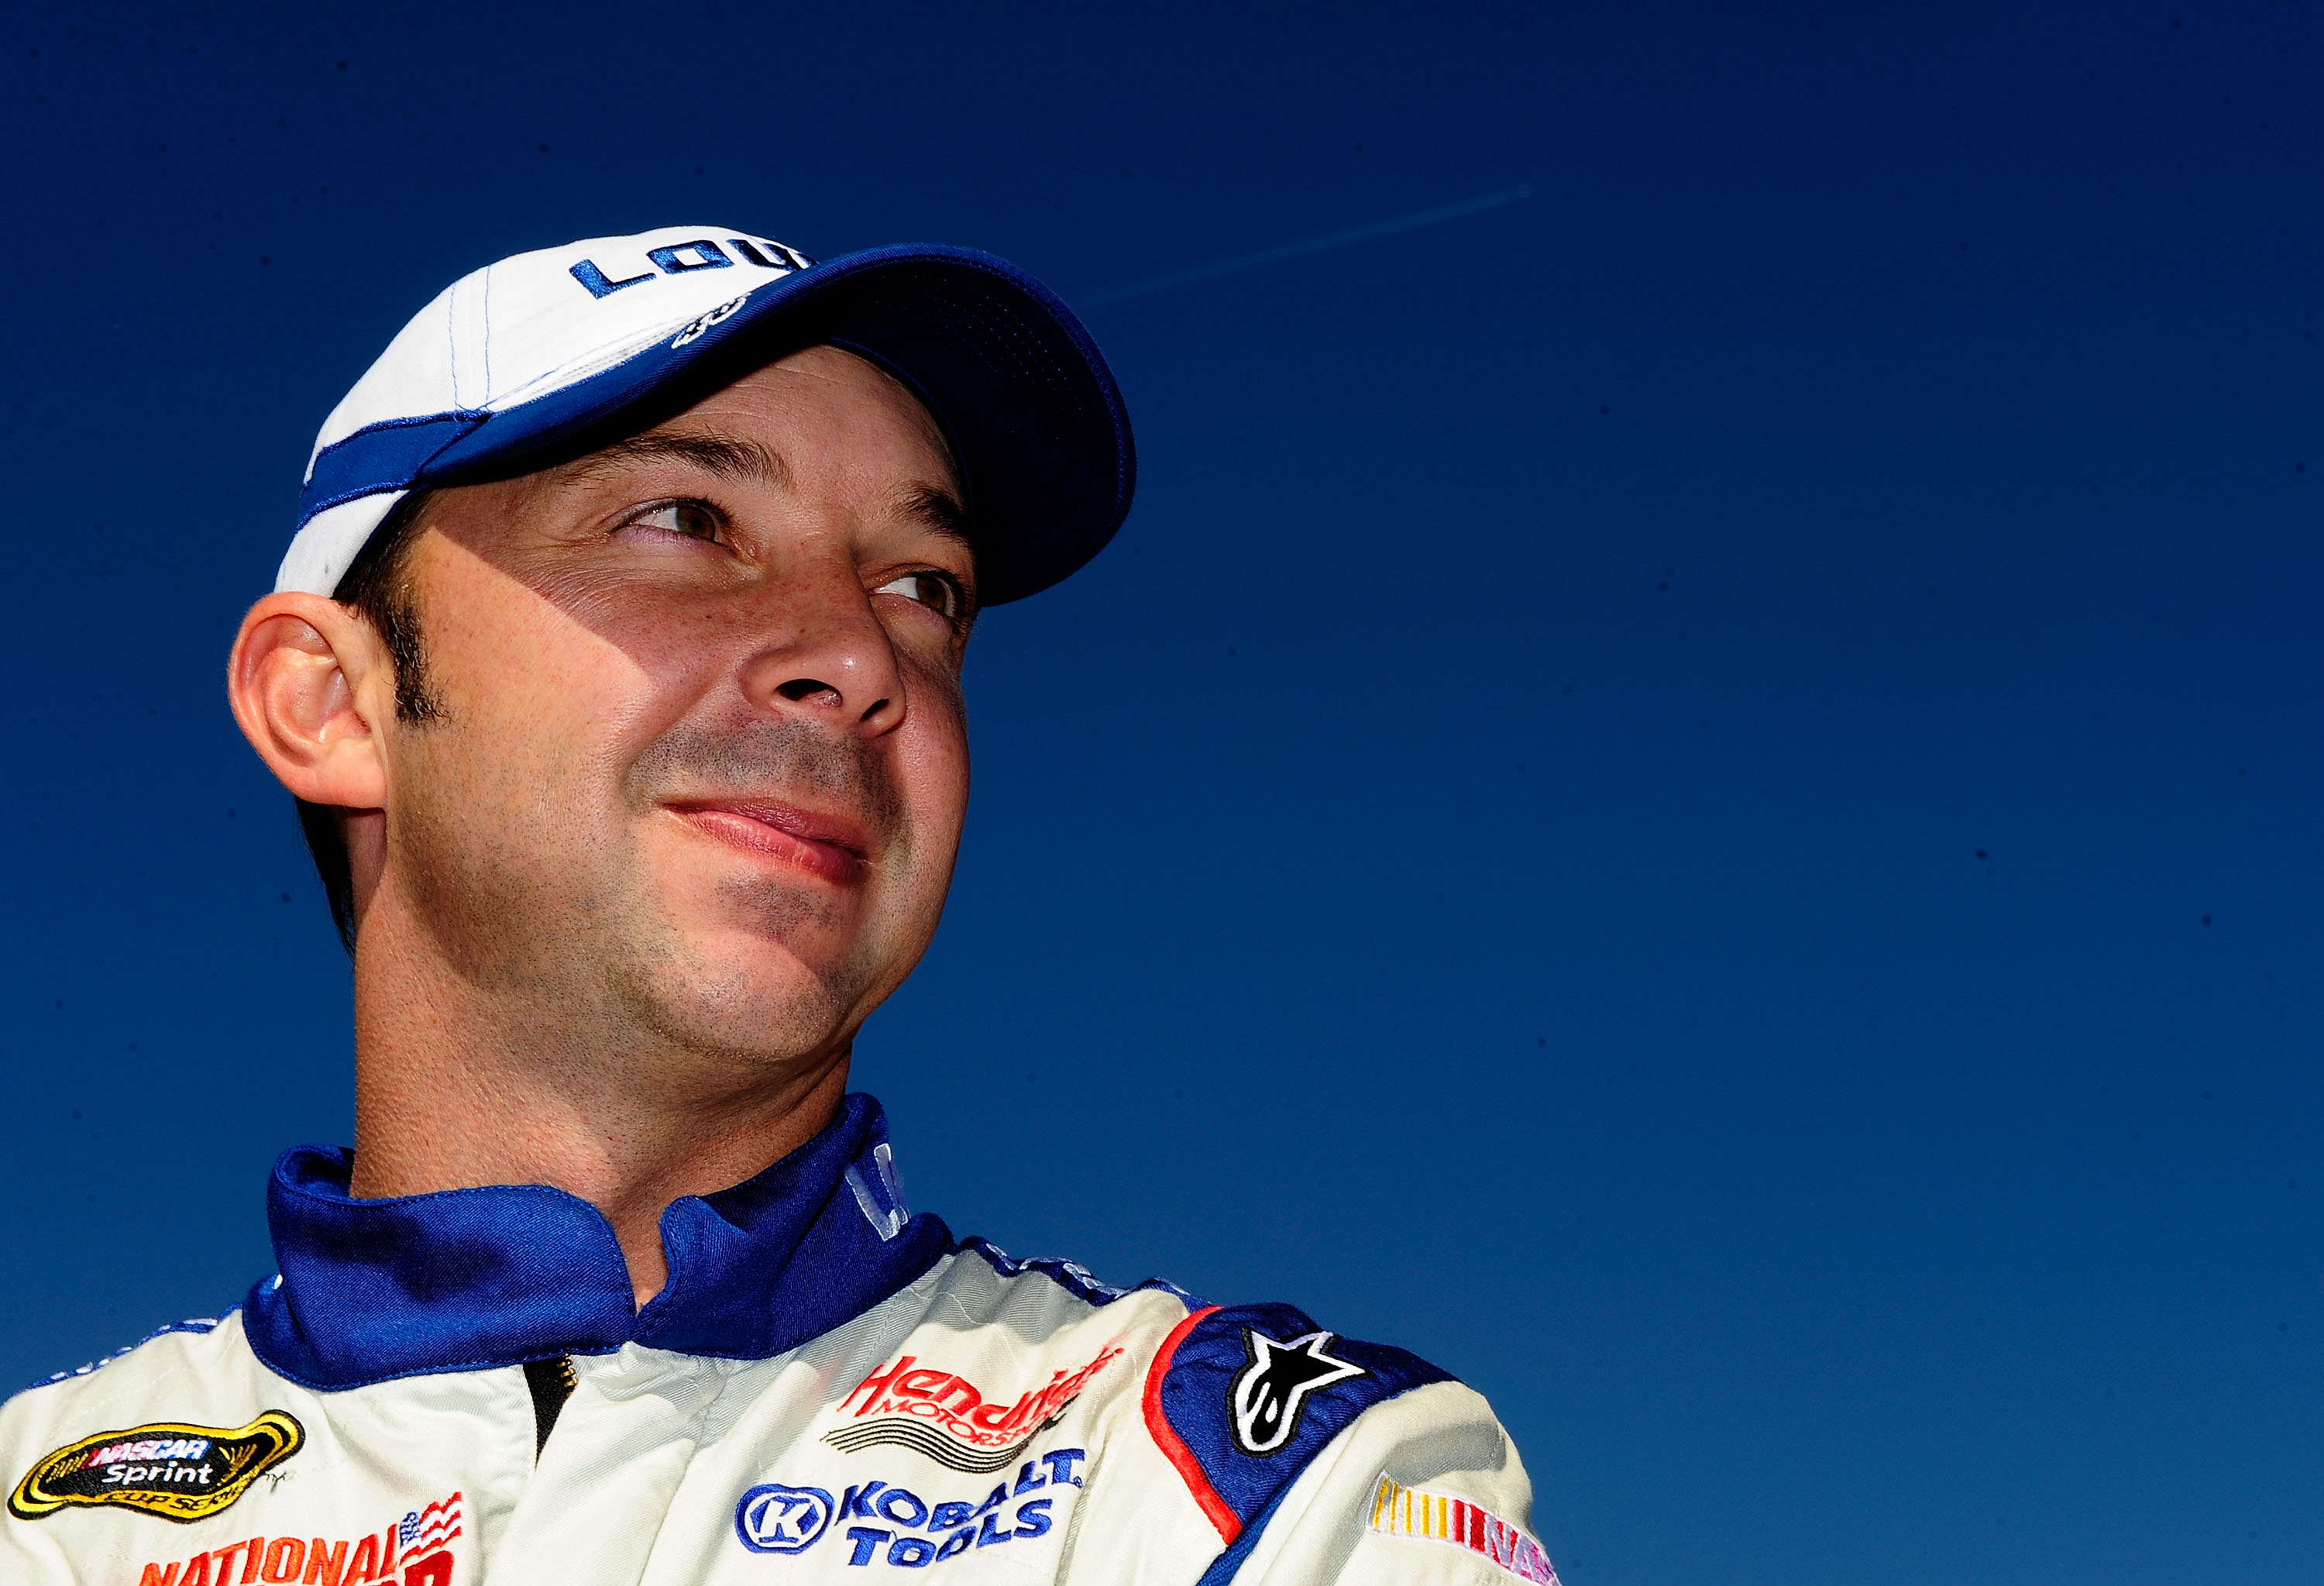 KANSAS CITY, KS - OCTOBER 03:  Chad Knaus, crew chief for Jimmie Johnson, driver of the #48 Lowe's Chevrolet, stands during prerace for the NASCAR Sprint Cup Series Price Chopper 400 on October 3, 2010 in Kansas City, Kansas.  (Photo by Rusty Jarrett/Gett